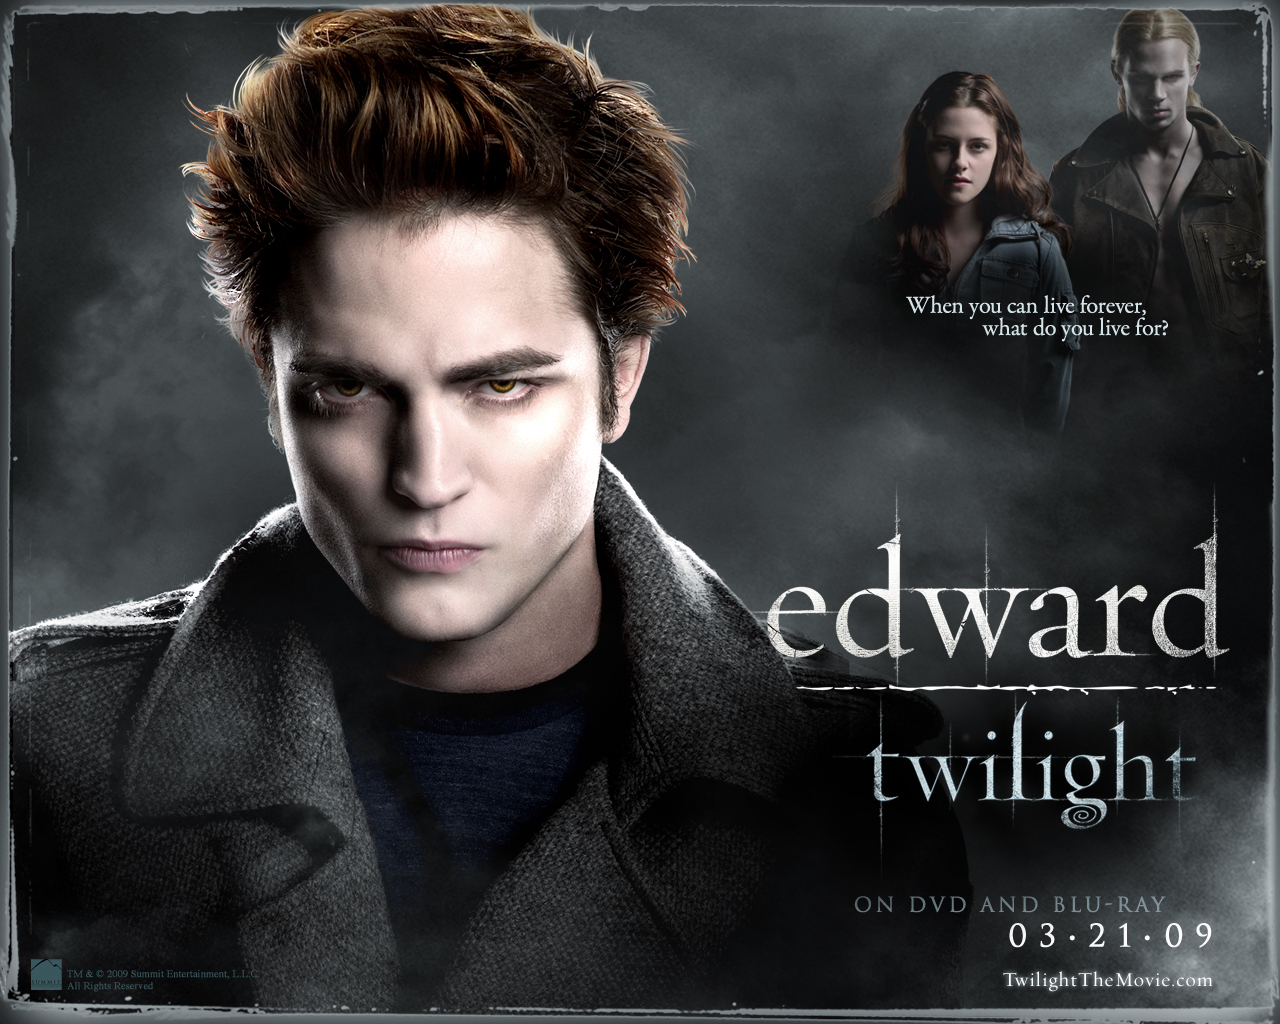 Edward Cullen Twilight New Moon wallpaper   Click picture for high 1280x1024